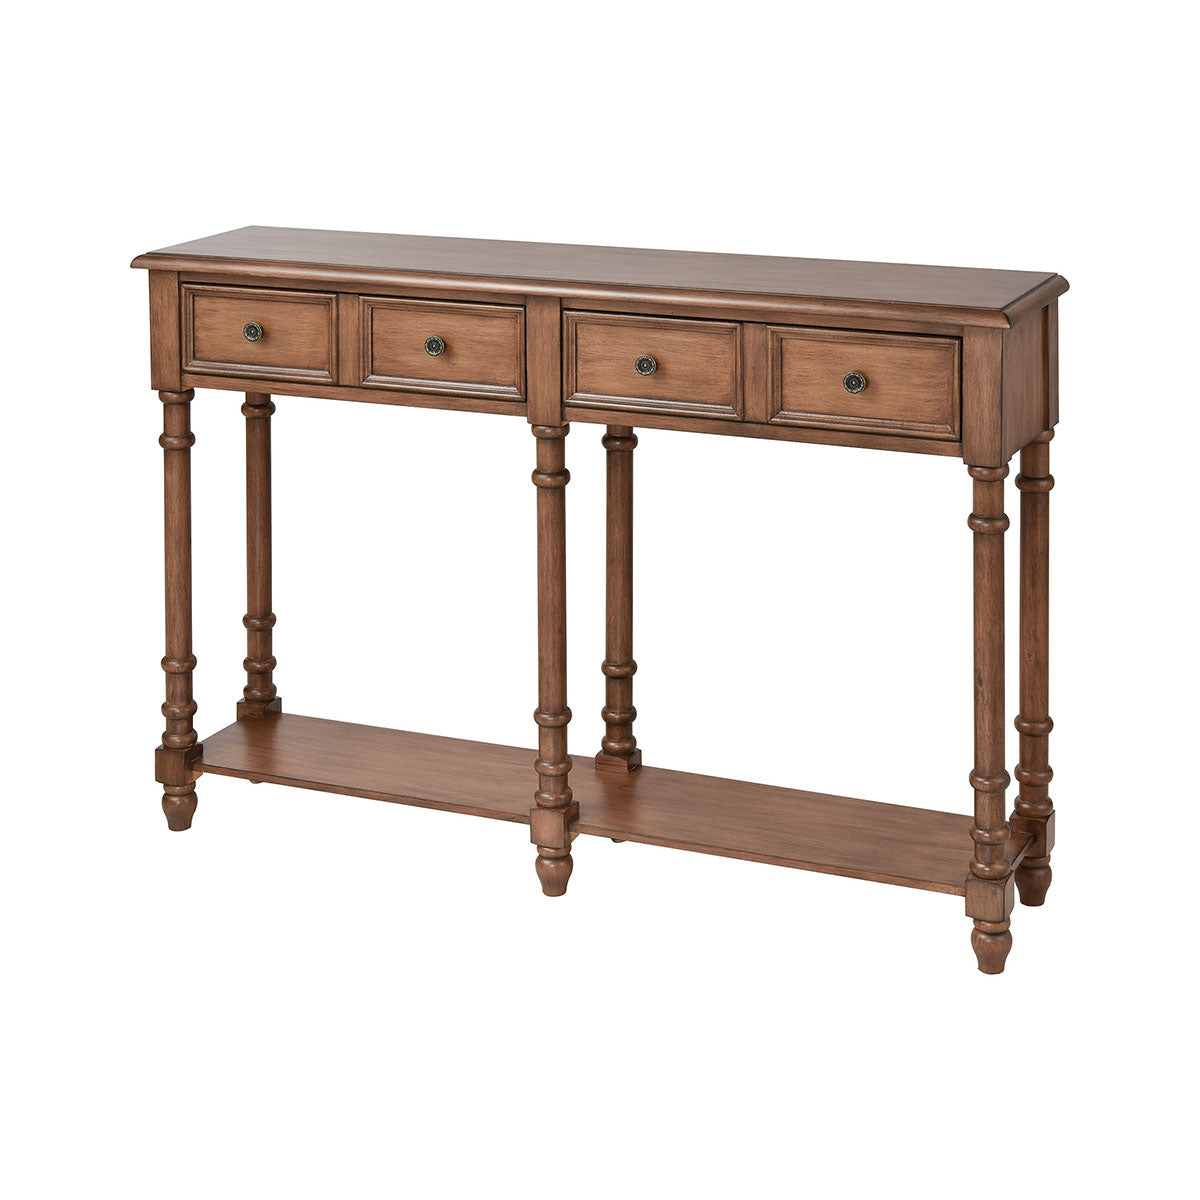 ELK Home - 16934 - Console Table - Hager - Brown